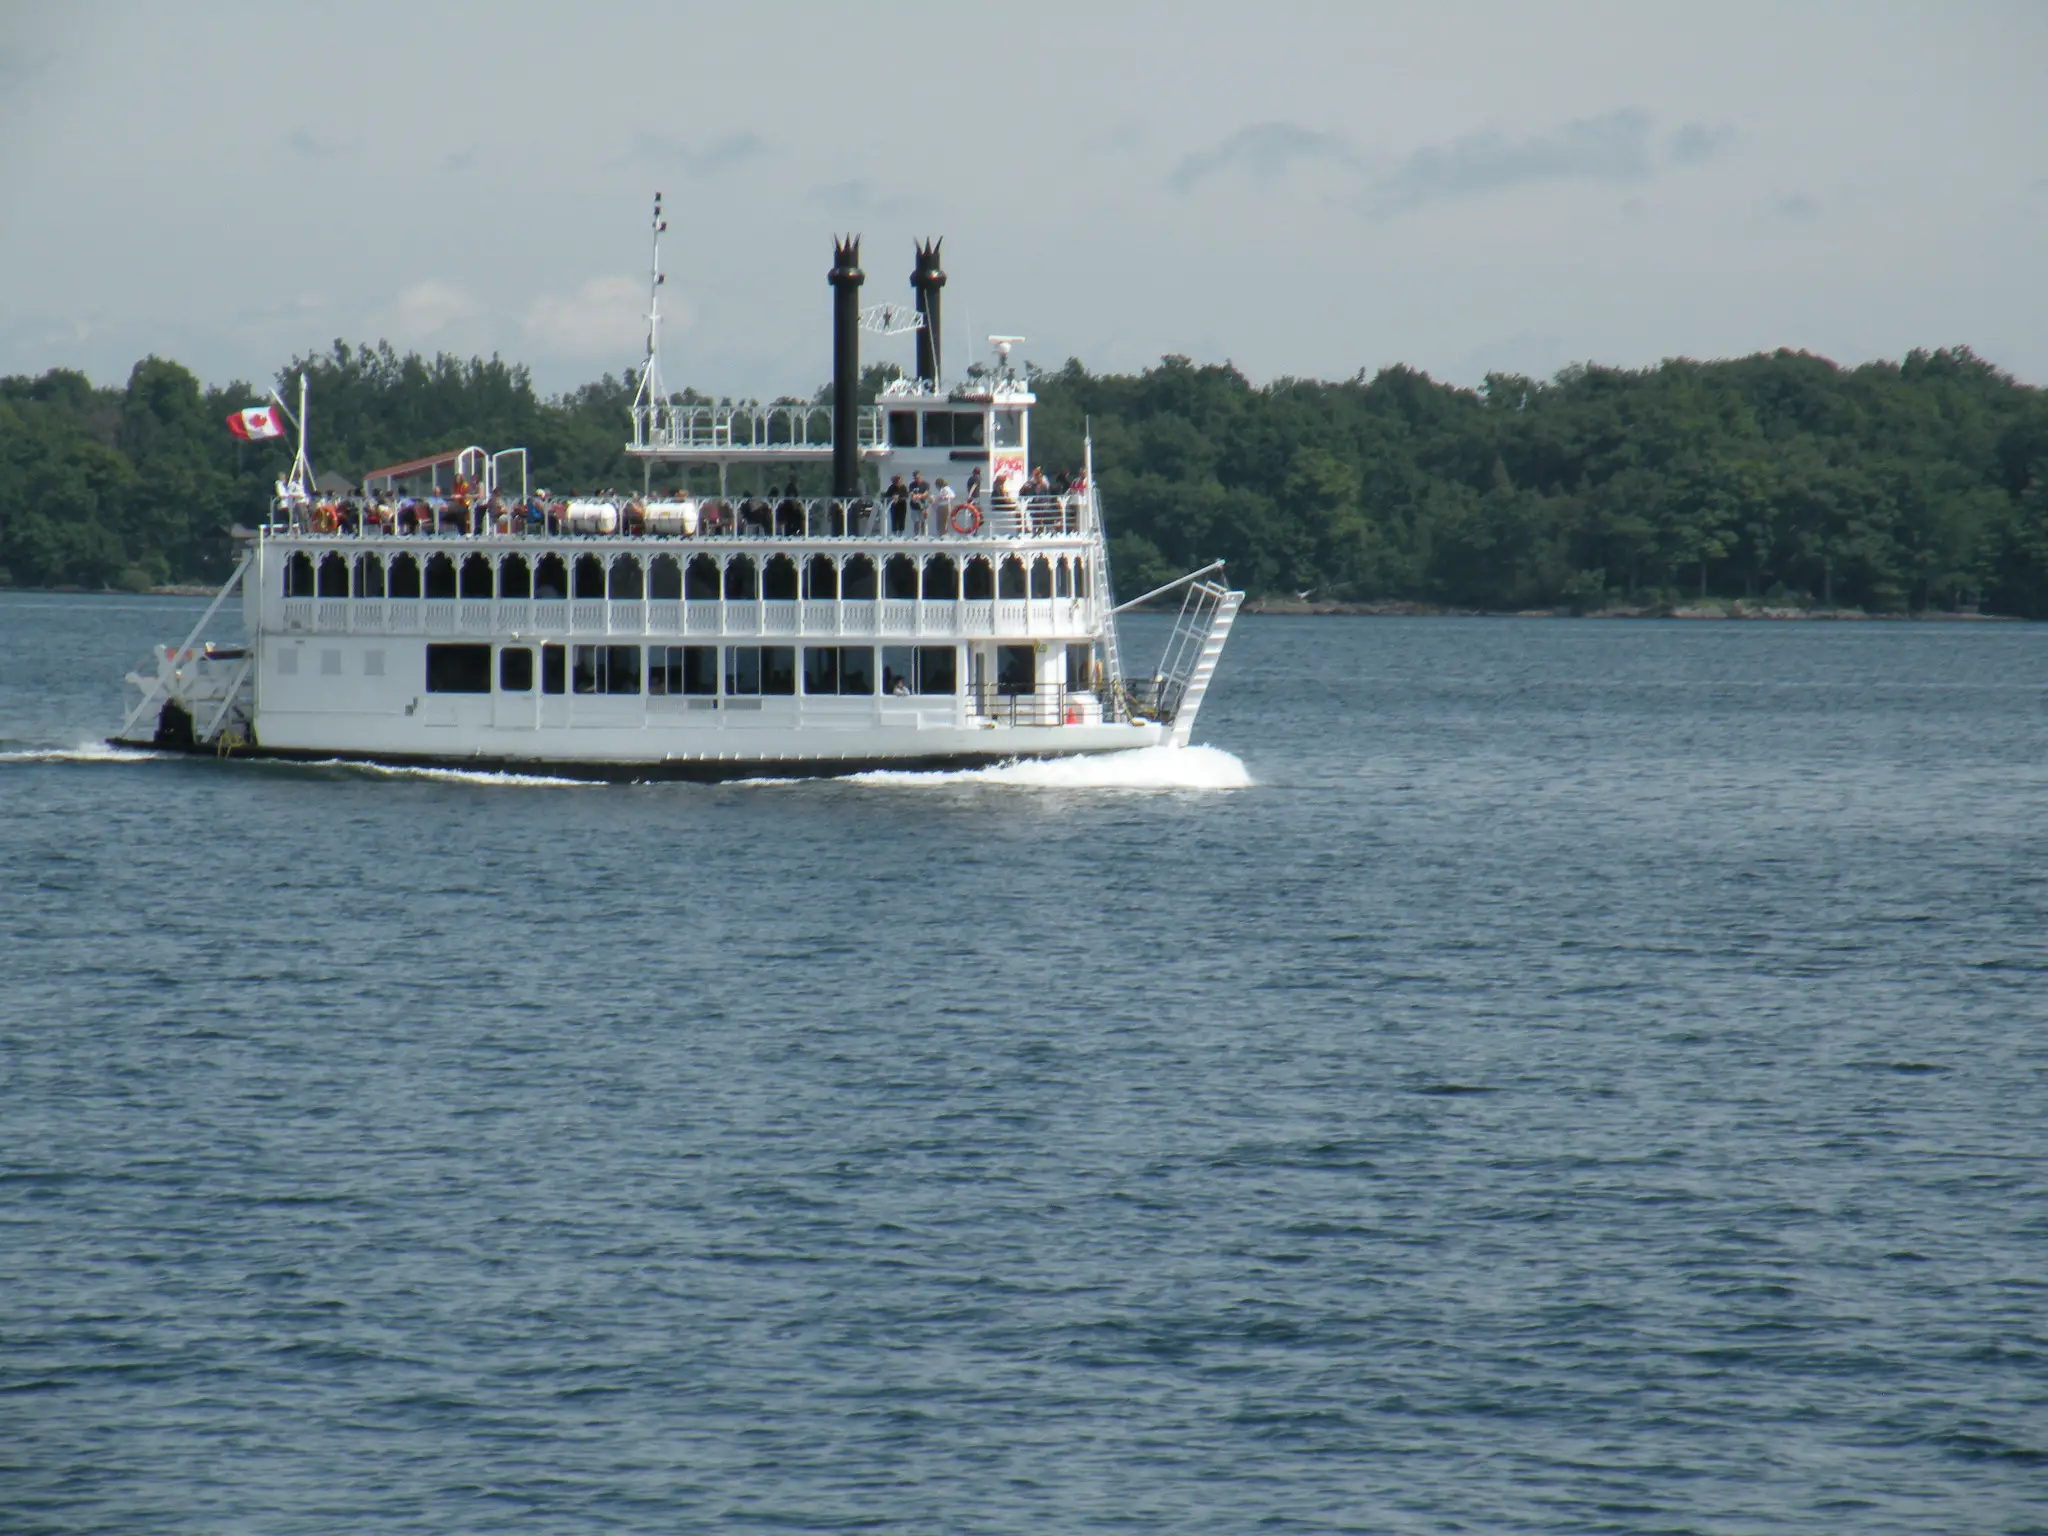 1000 islands cruise from kingston